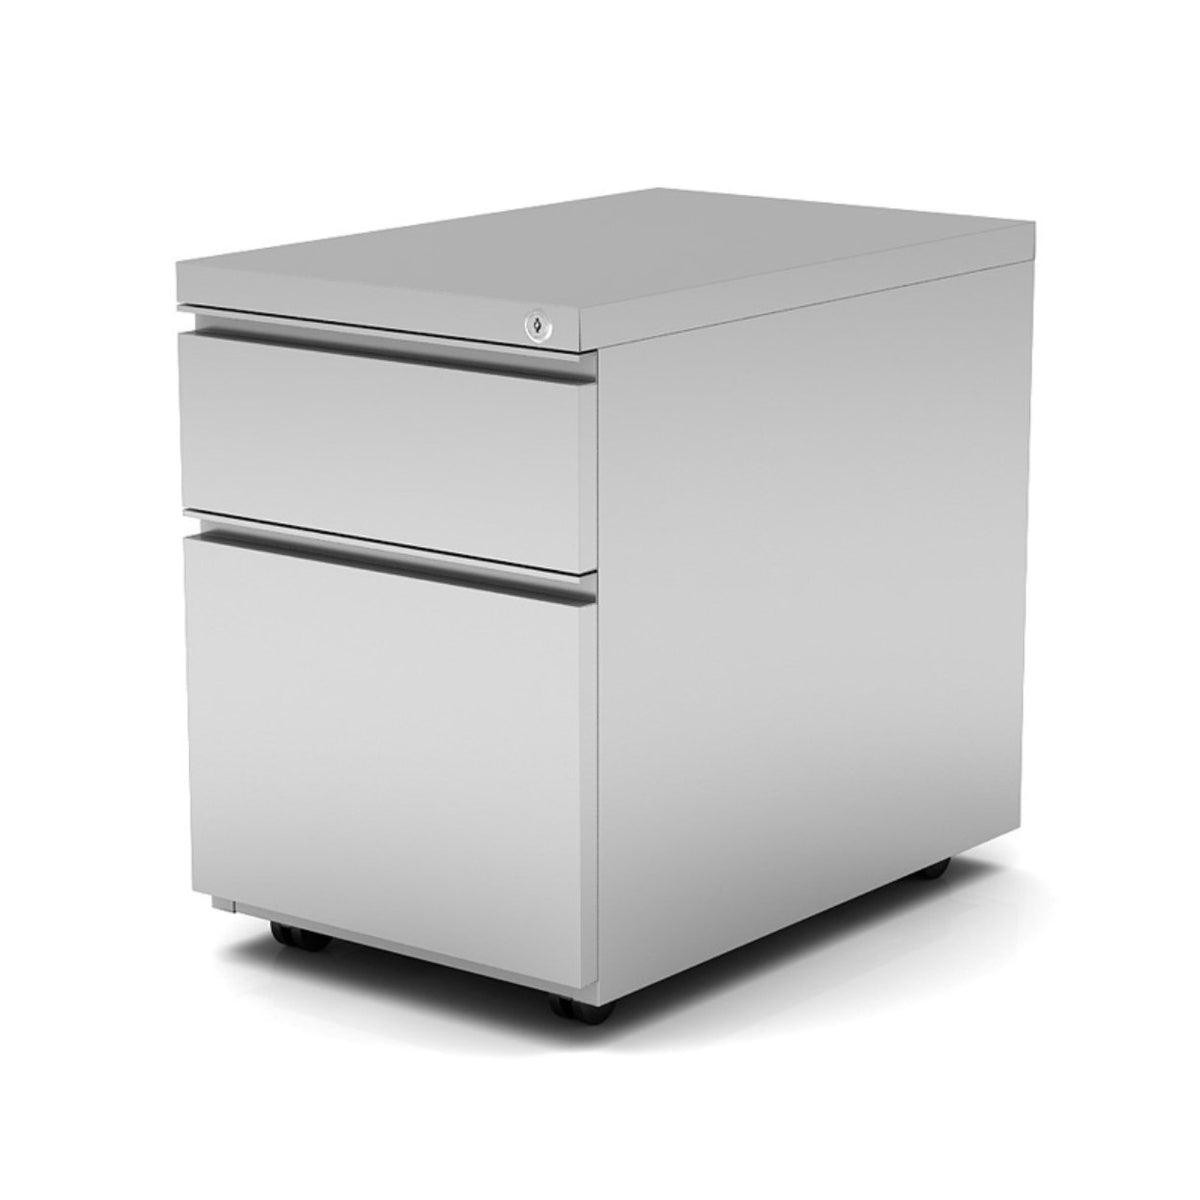 Performance - Mobile Low Drawer Pedestal File - Duckys Office Furniture